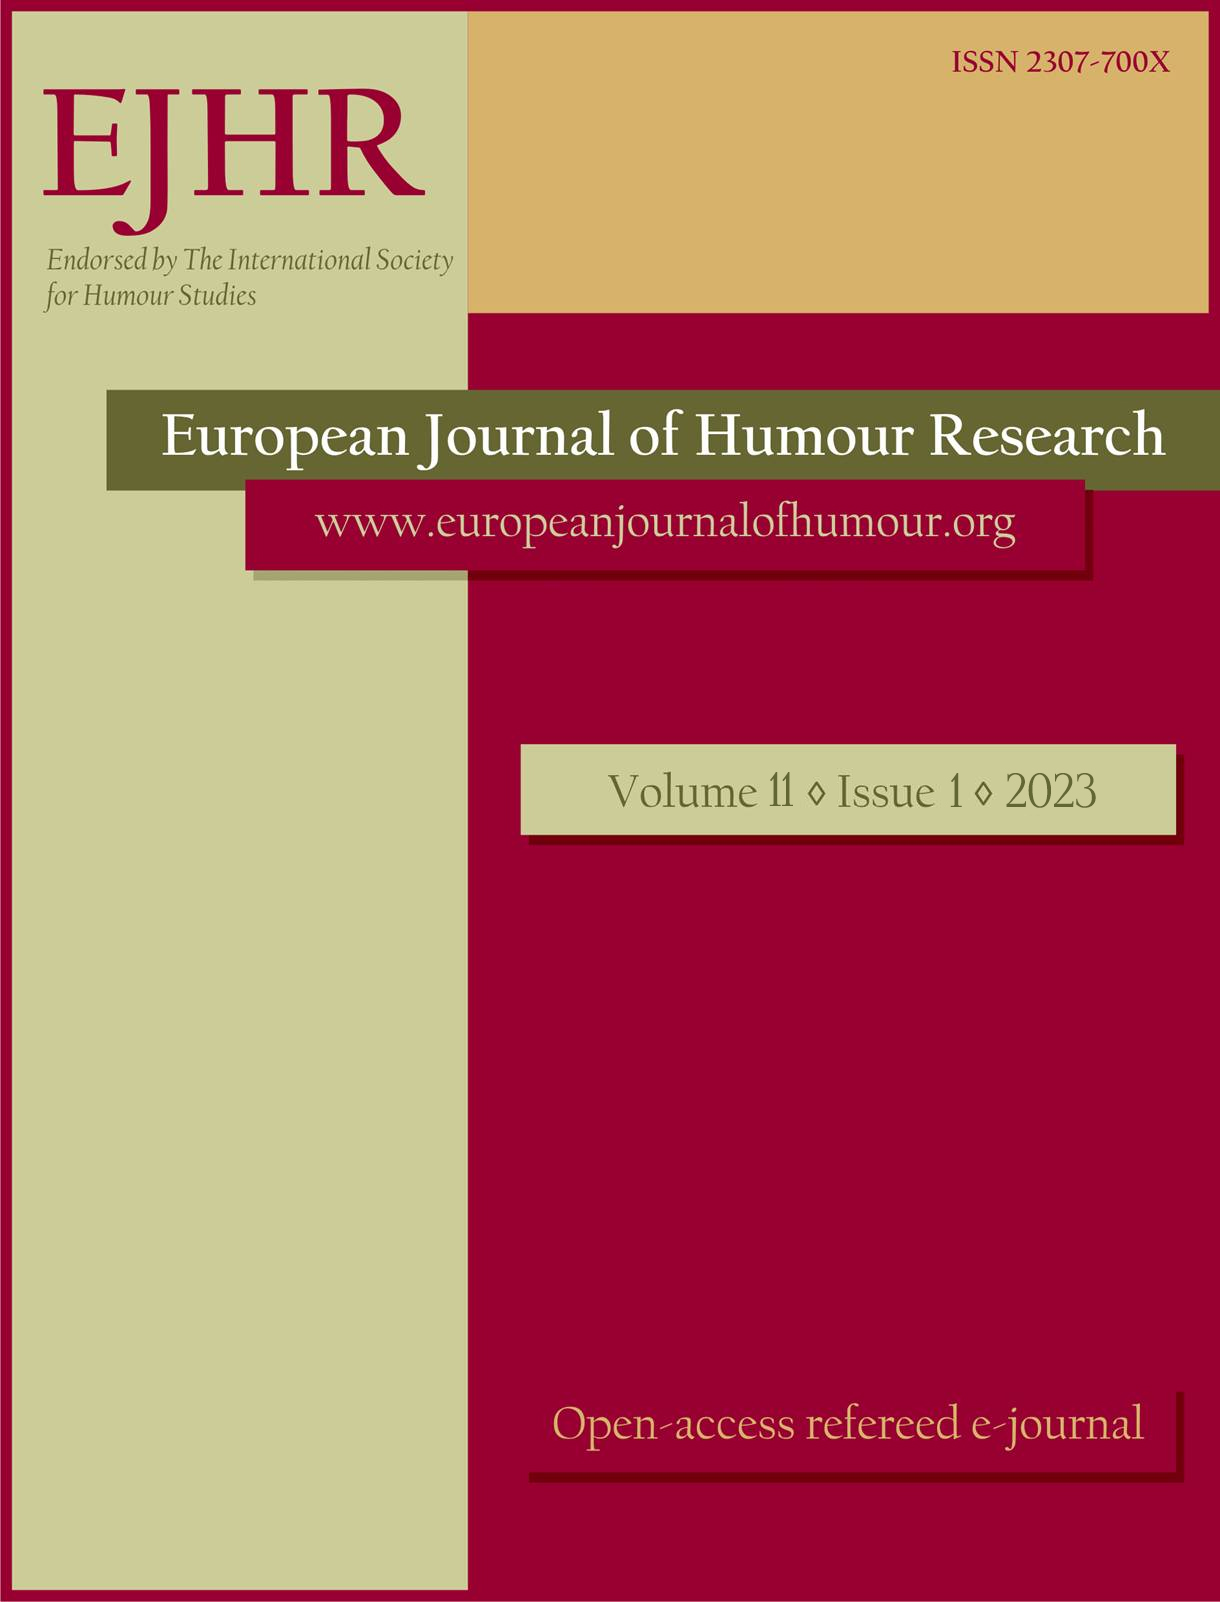 Beyond laughter and smiles: Cover Image